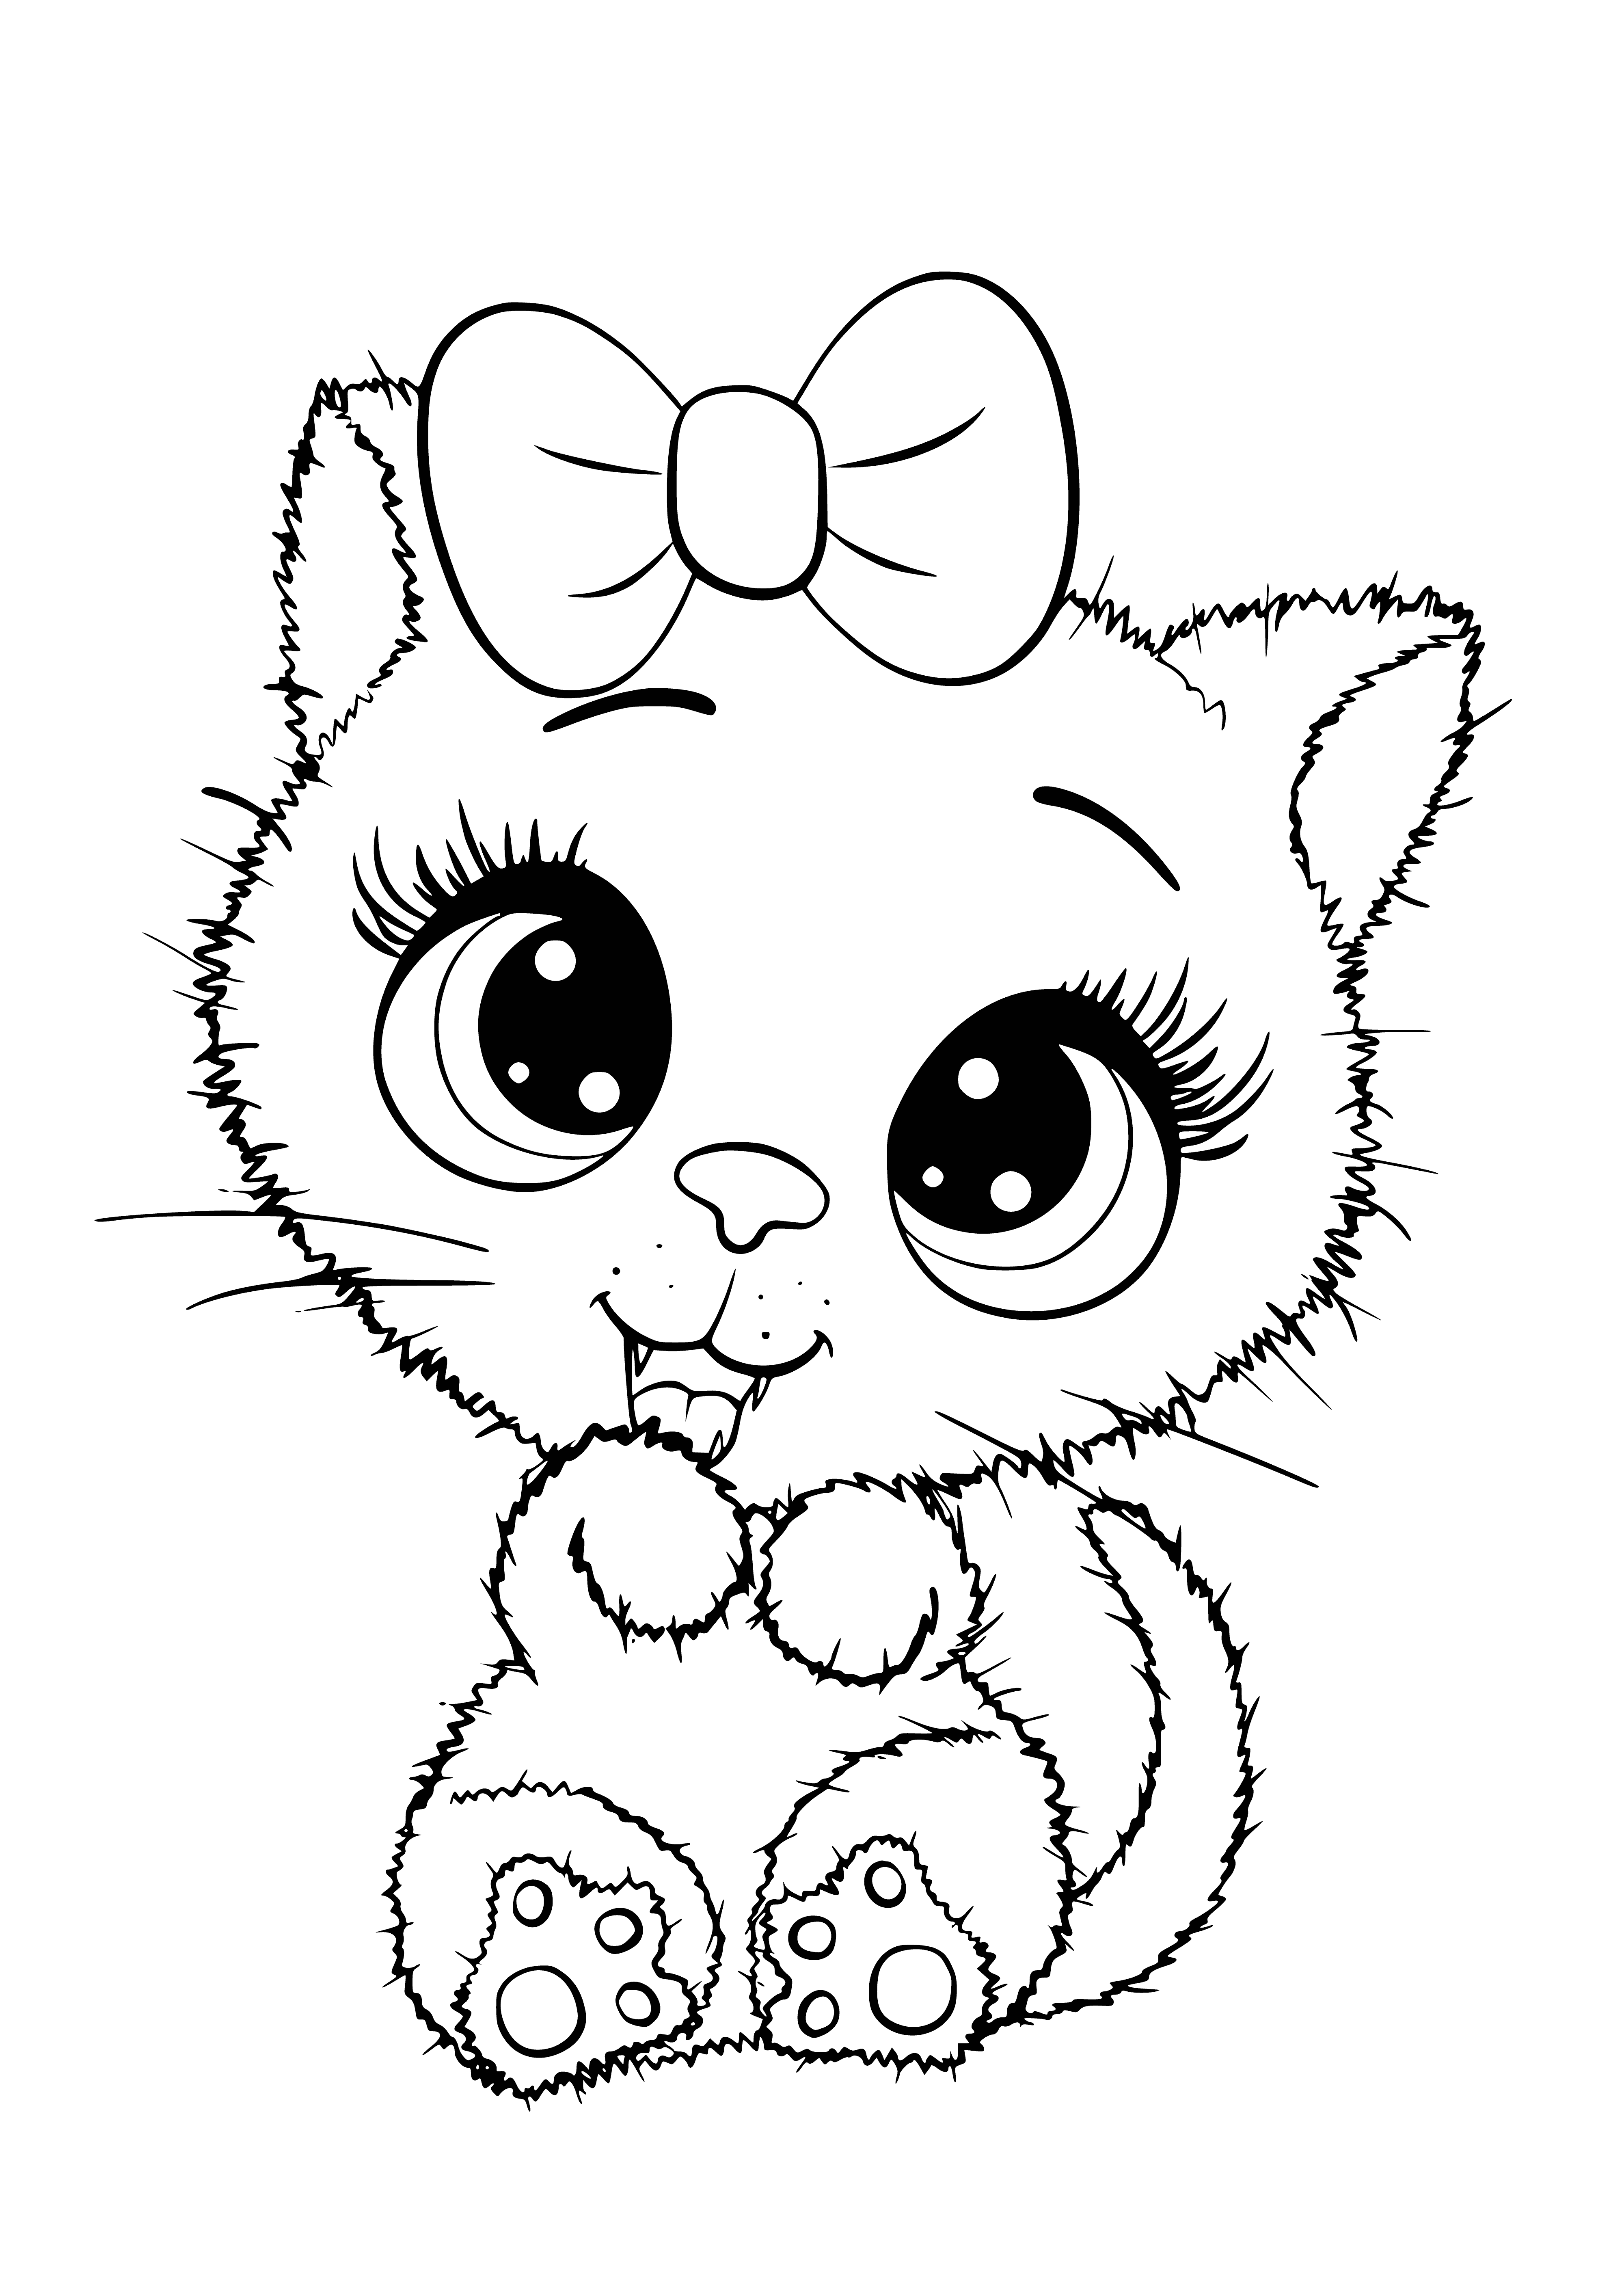 Cute kitty coloring page